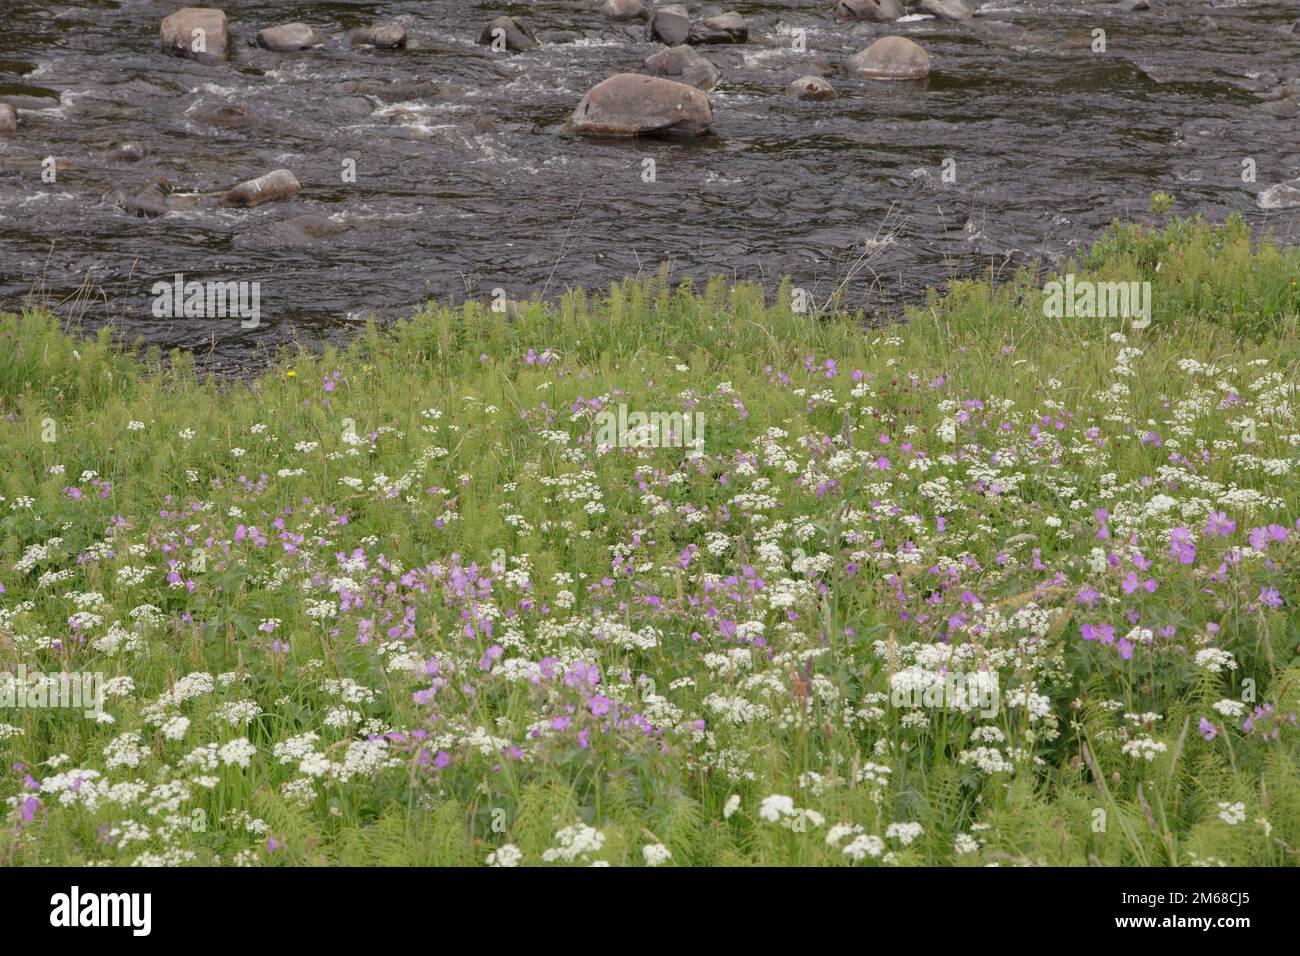 Wild flowers and plants grow on the bank of the River Tees in County Durham Stock Photo